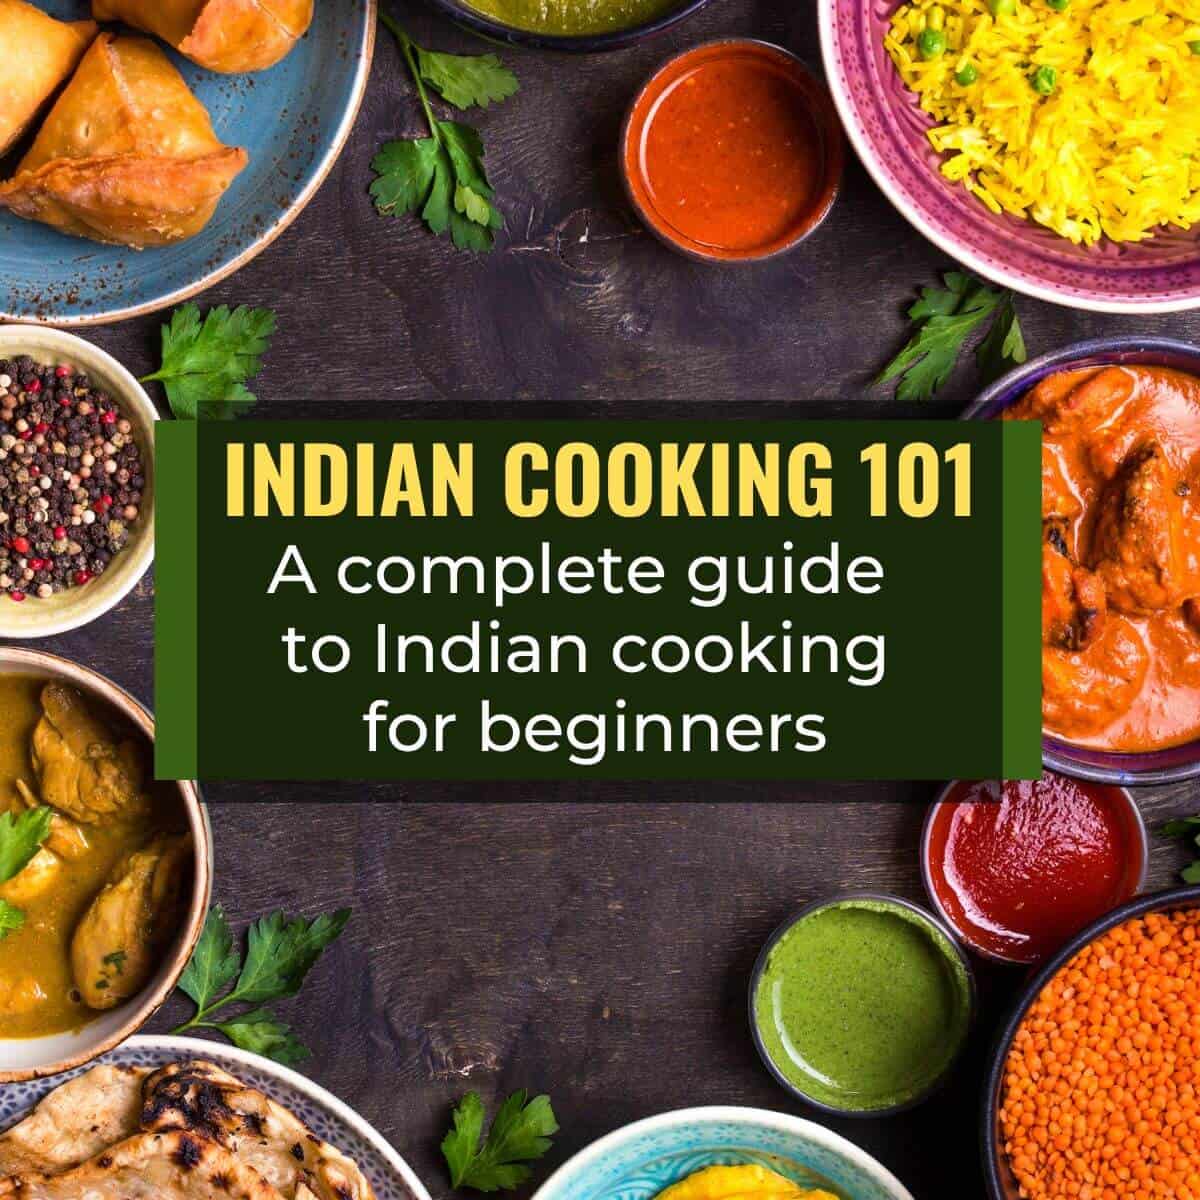 A caption over an image for Indian food reads Indian cooking 101 - A beginner's guide to Indian cooking